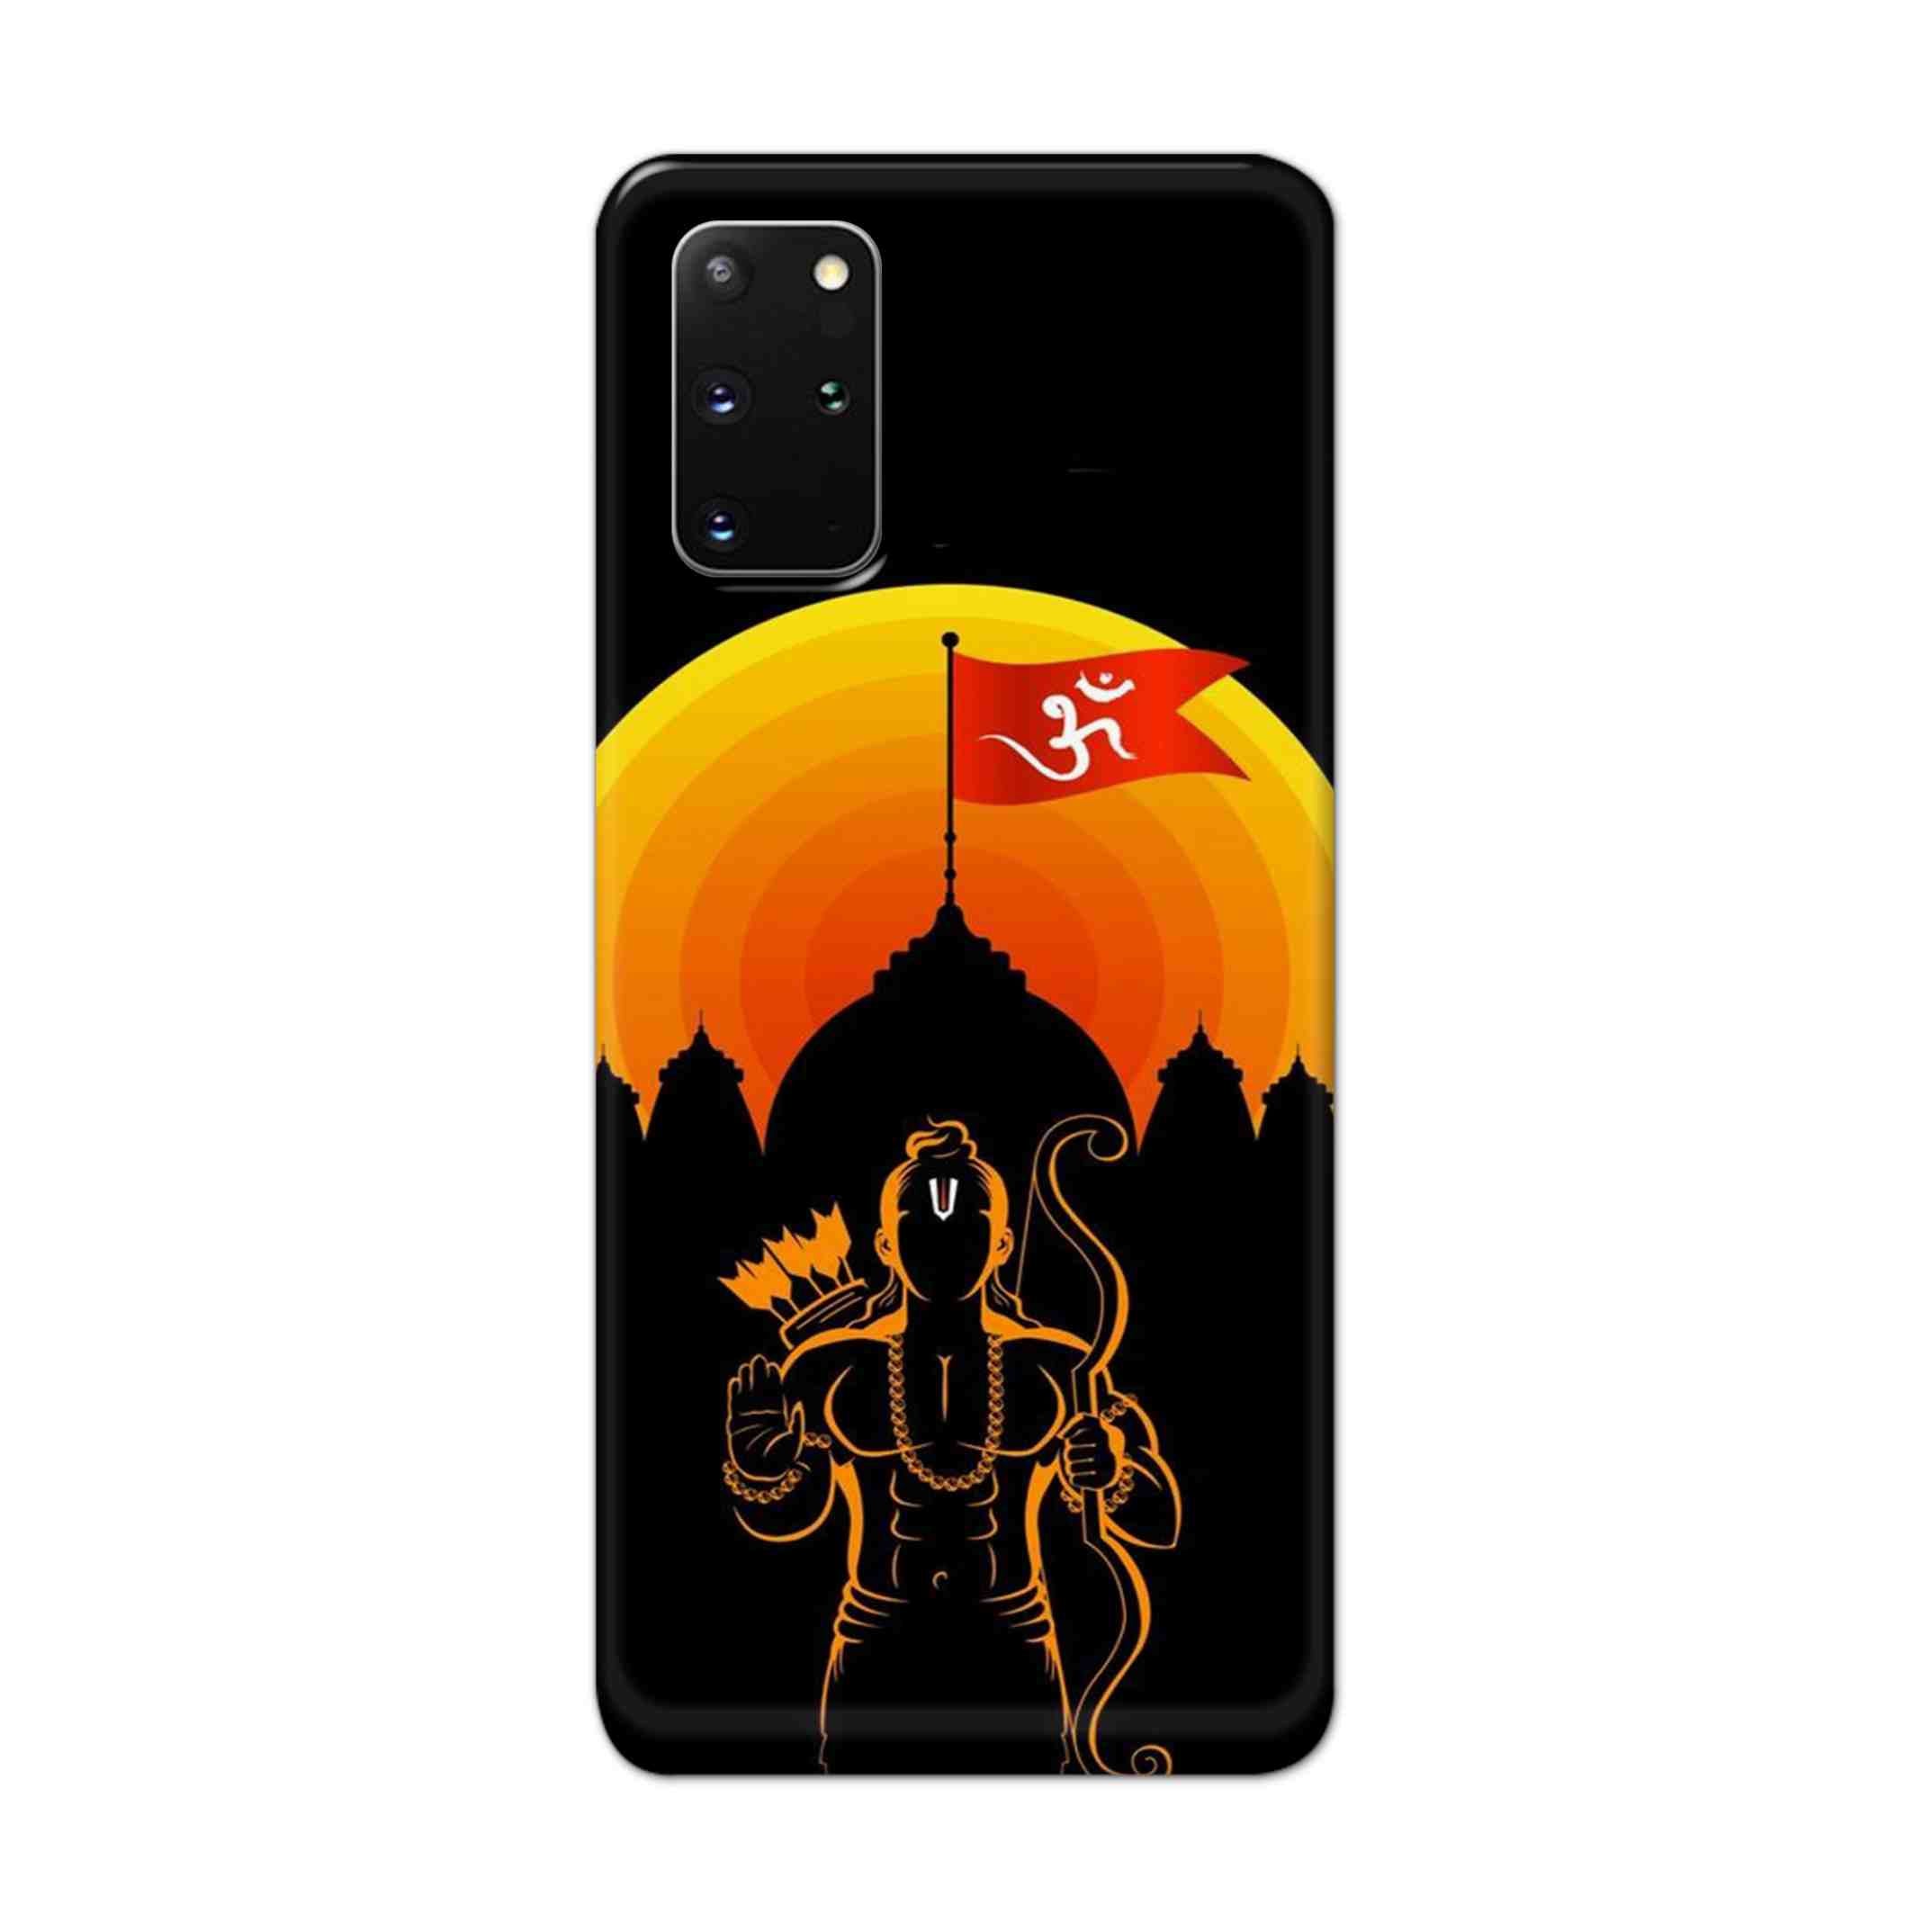 Buy Ram Ji Hard Back Mobile Phone Case Cover For Samsung Galaxy S20 Plus Online